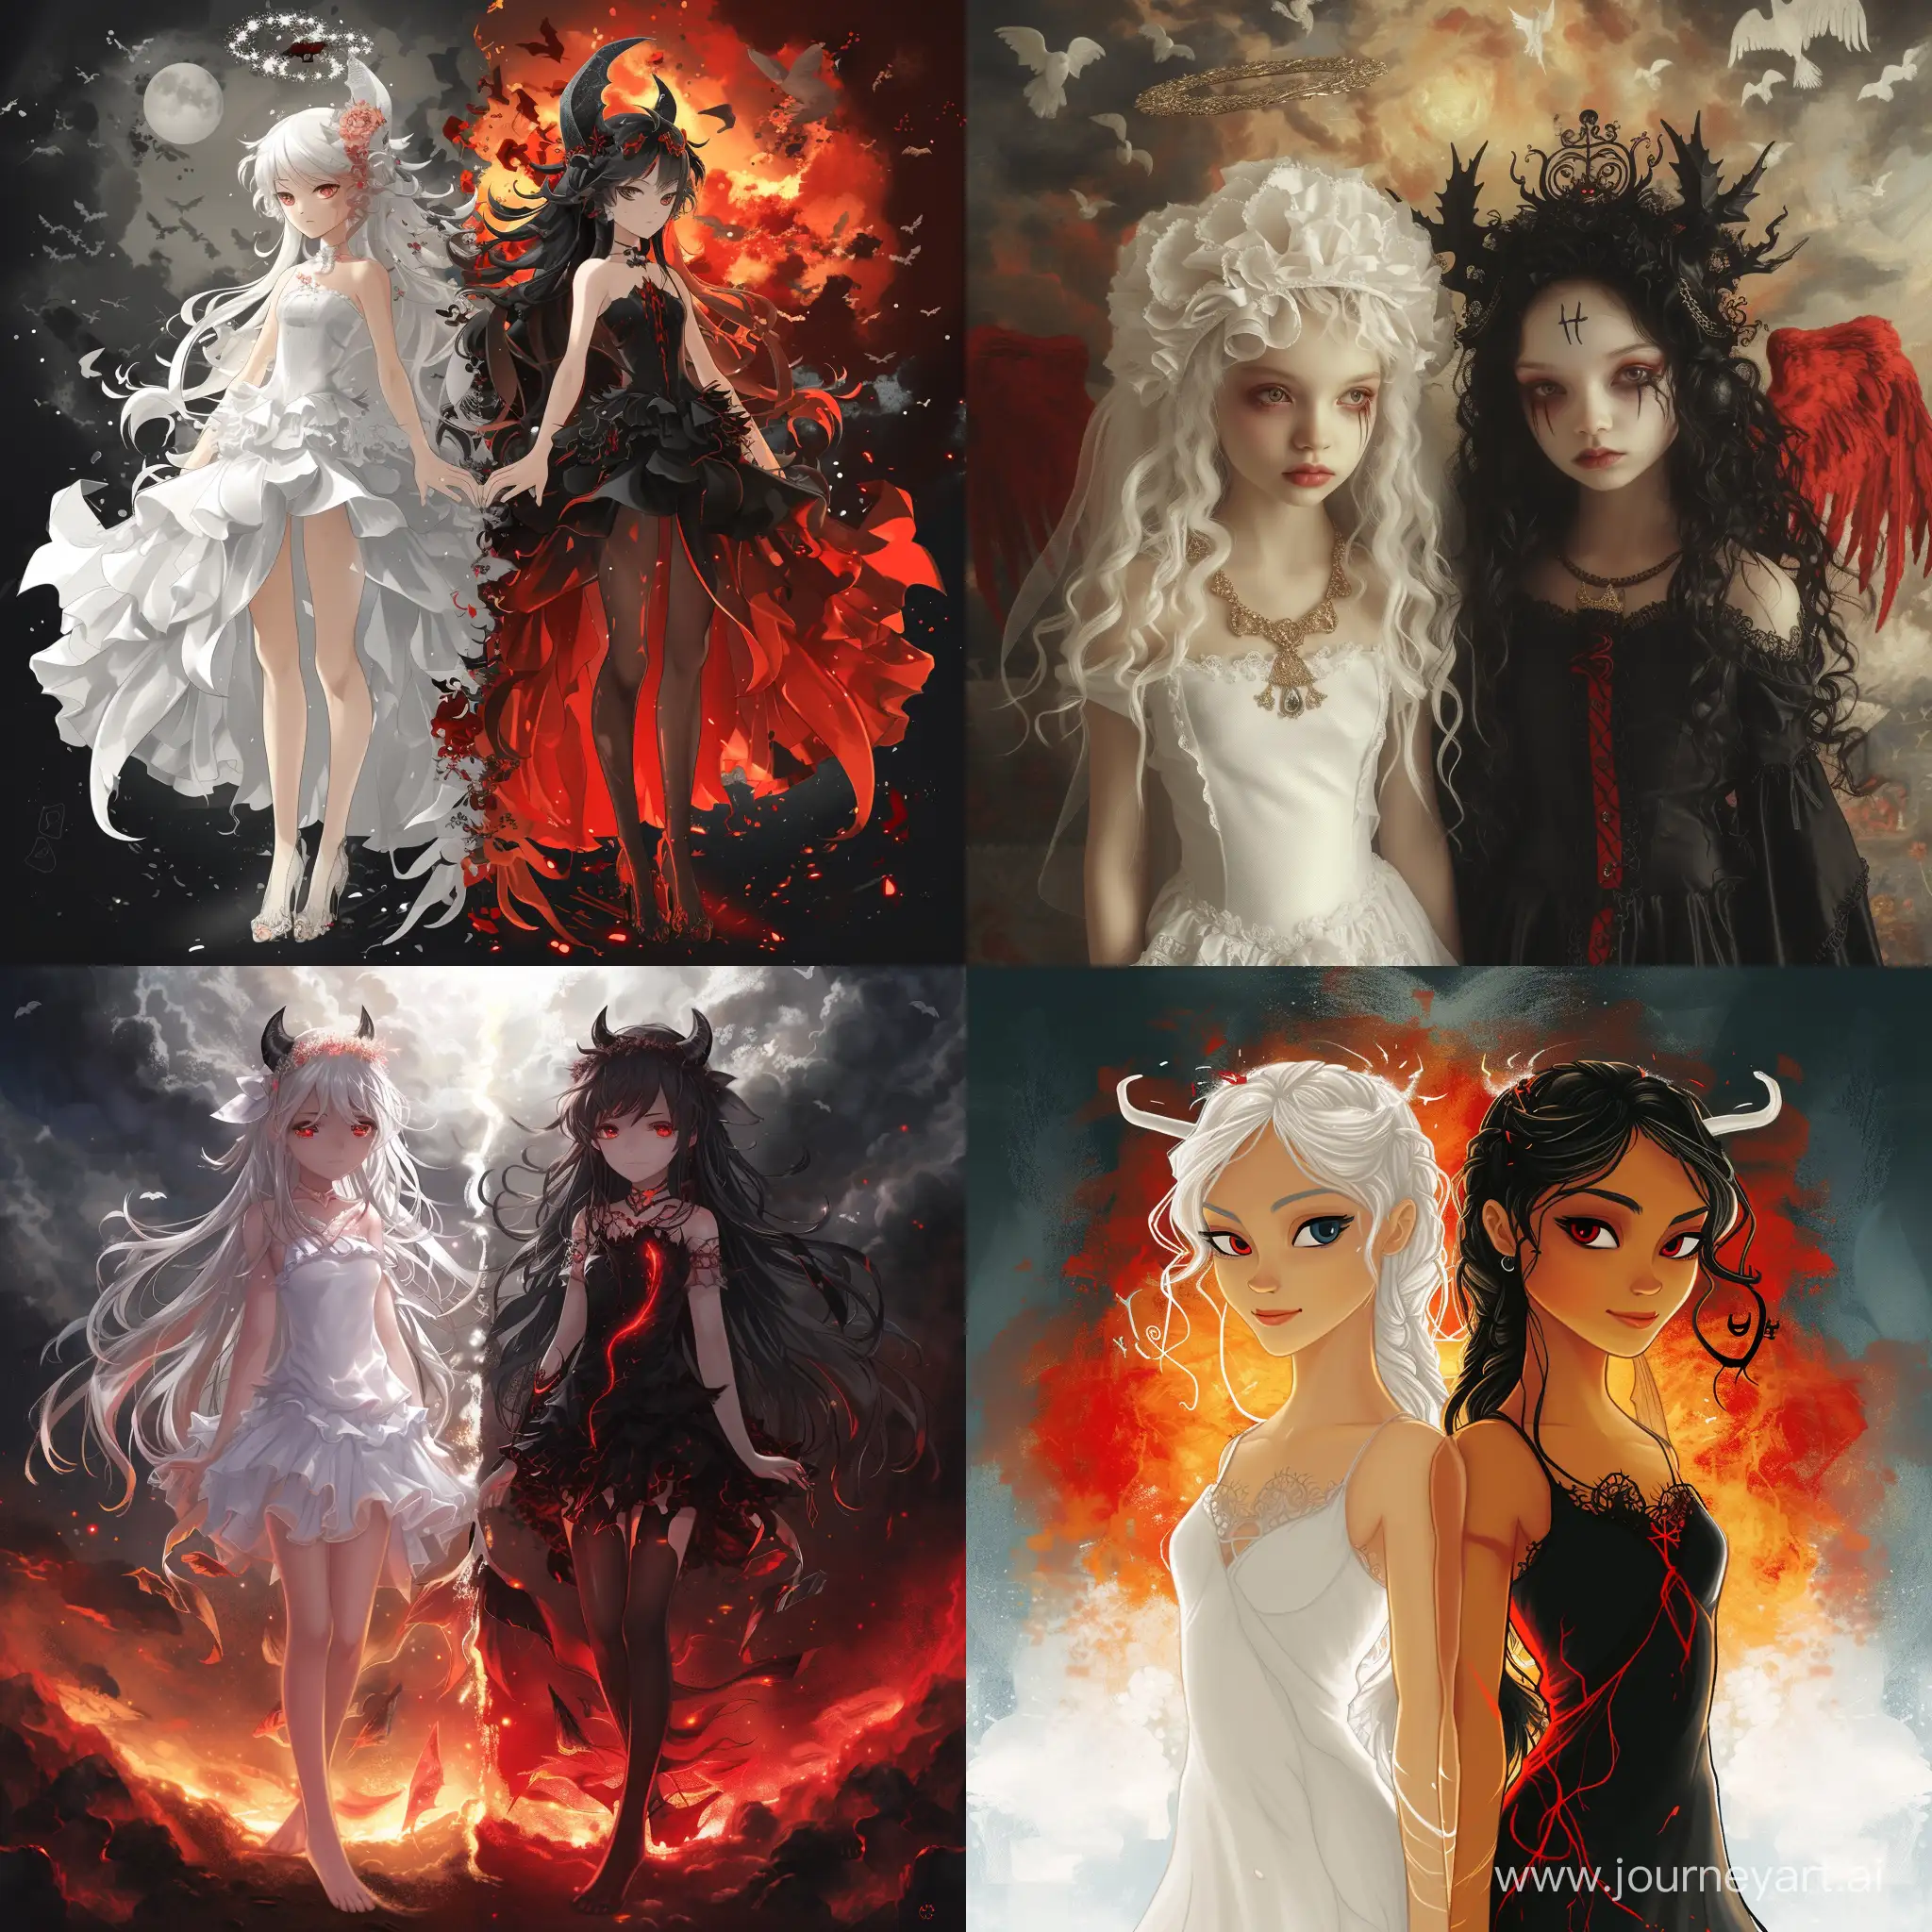 create image with two girls, one is dressed white, and has heaven behind her, other one is dressed black and red and has hell behind her, booat are in the same picture